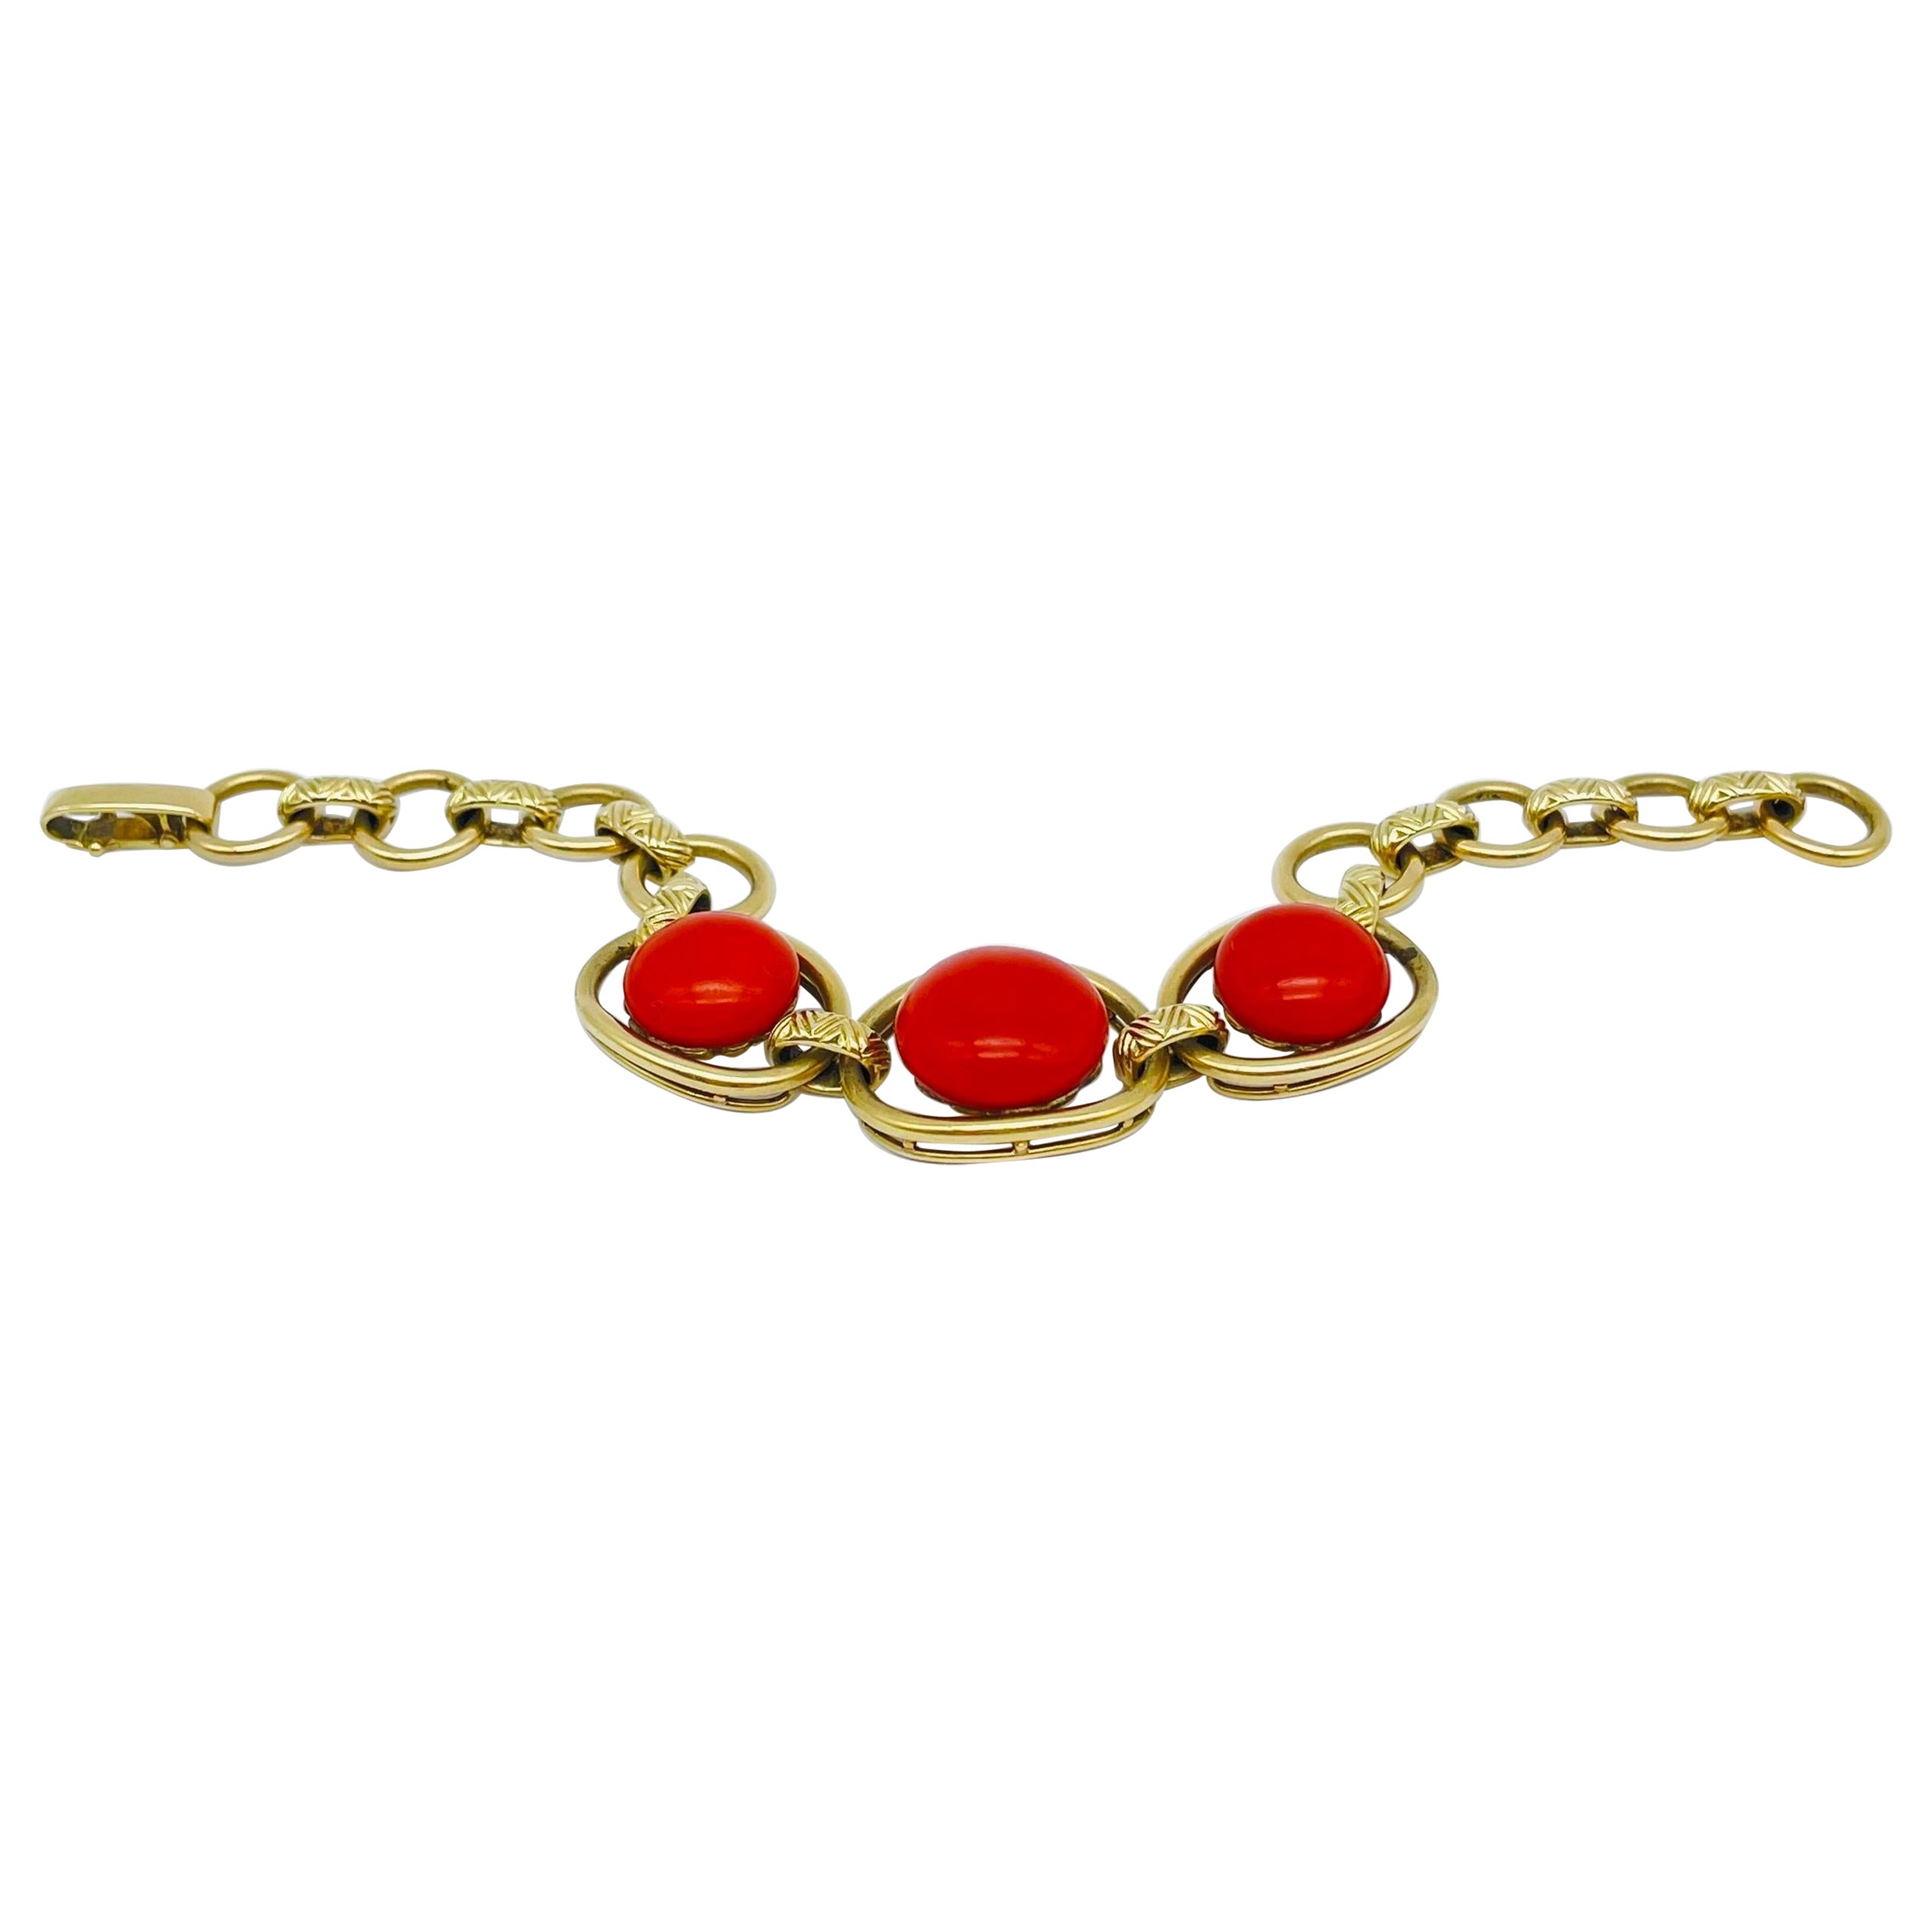 Exceptional Bracelet 14k Gold Link Chain Red Coral